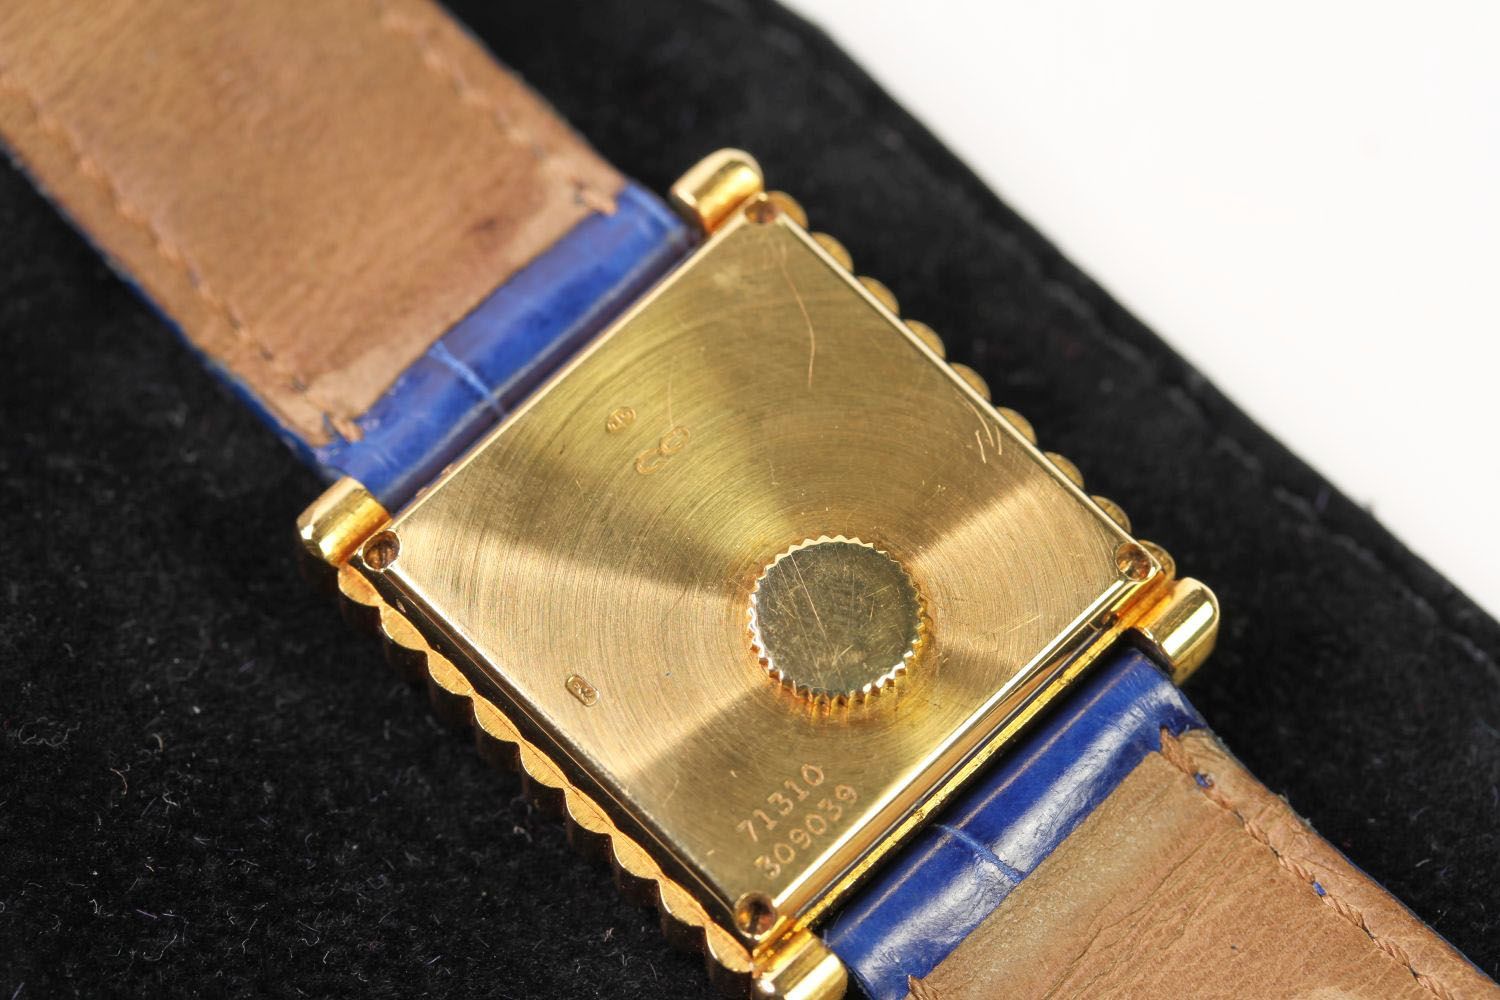 18CT PIAGET LAPIS WRIST WATCH WITH PAPERS AND POUCH REFERENCE 71310, square lapis dial with gold - Image 3 of 4